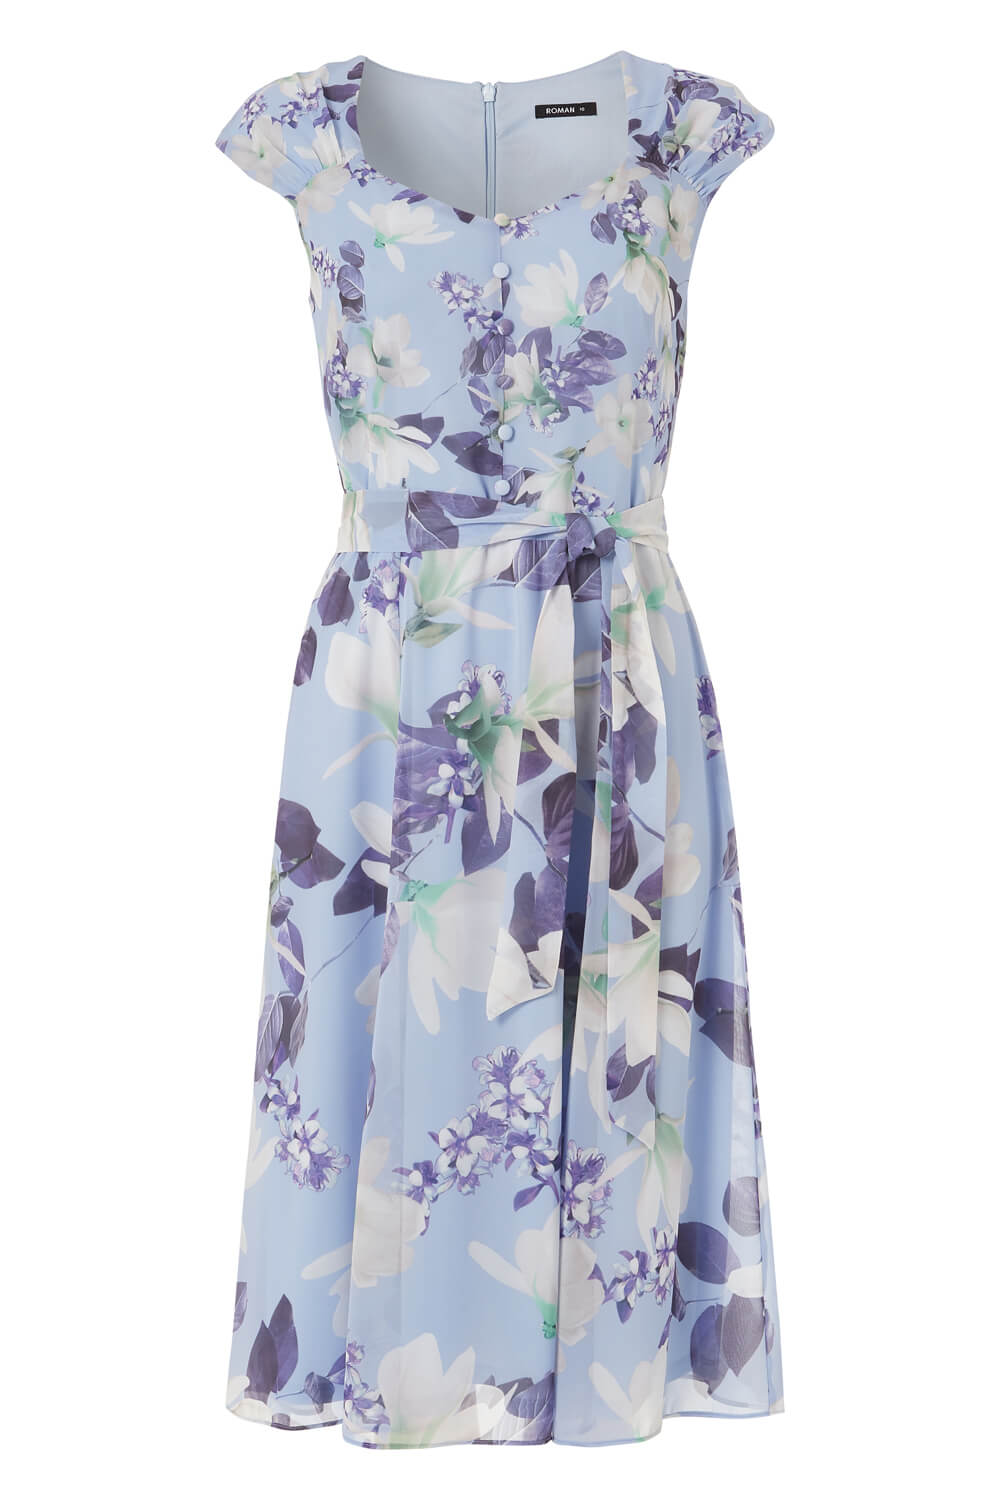 Floral Fit and Flare Belted Dress in Lilac - Roman Originals UK